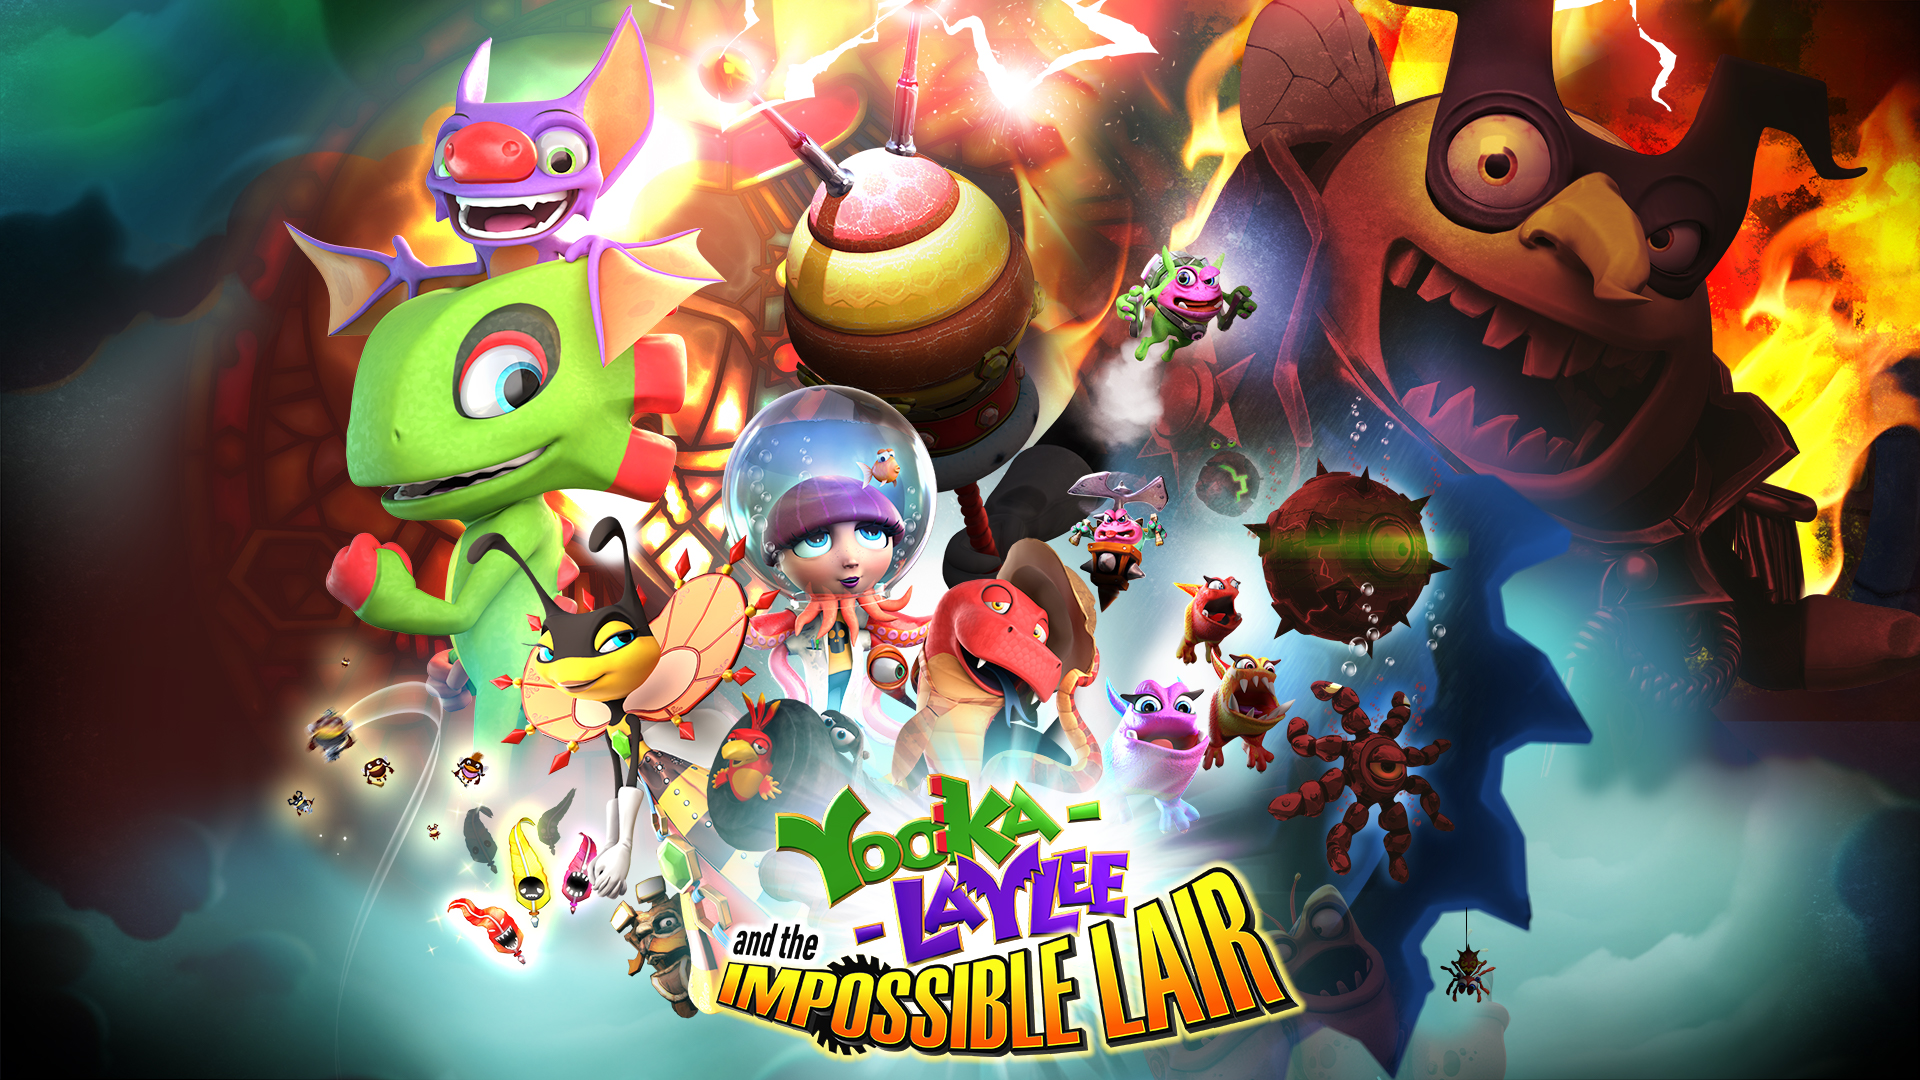 Soon! Original Team17 Digital the Yooka- LTD & Lair Spirit Laylee Impossible Independent Update Today - Yooka-Laylee Of - The Games Update and Out